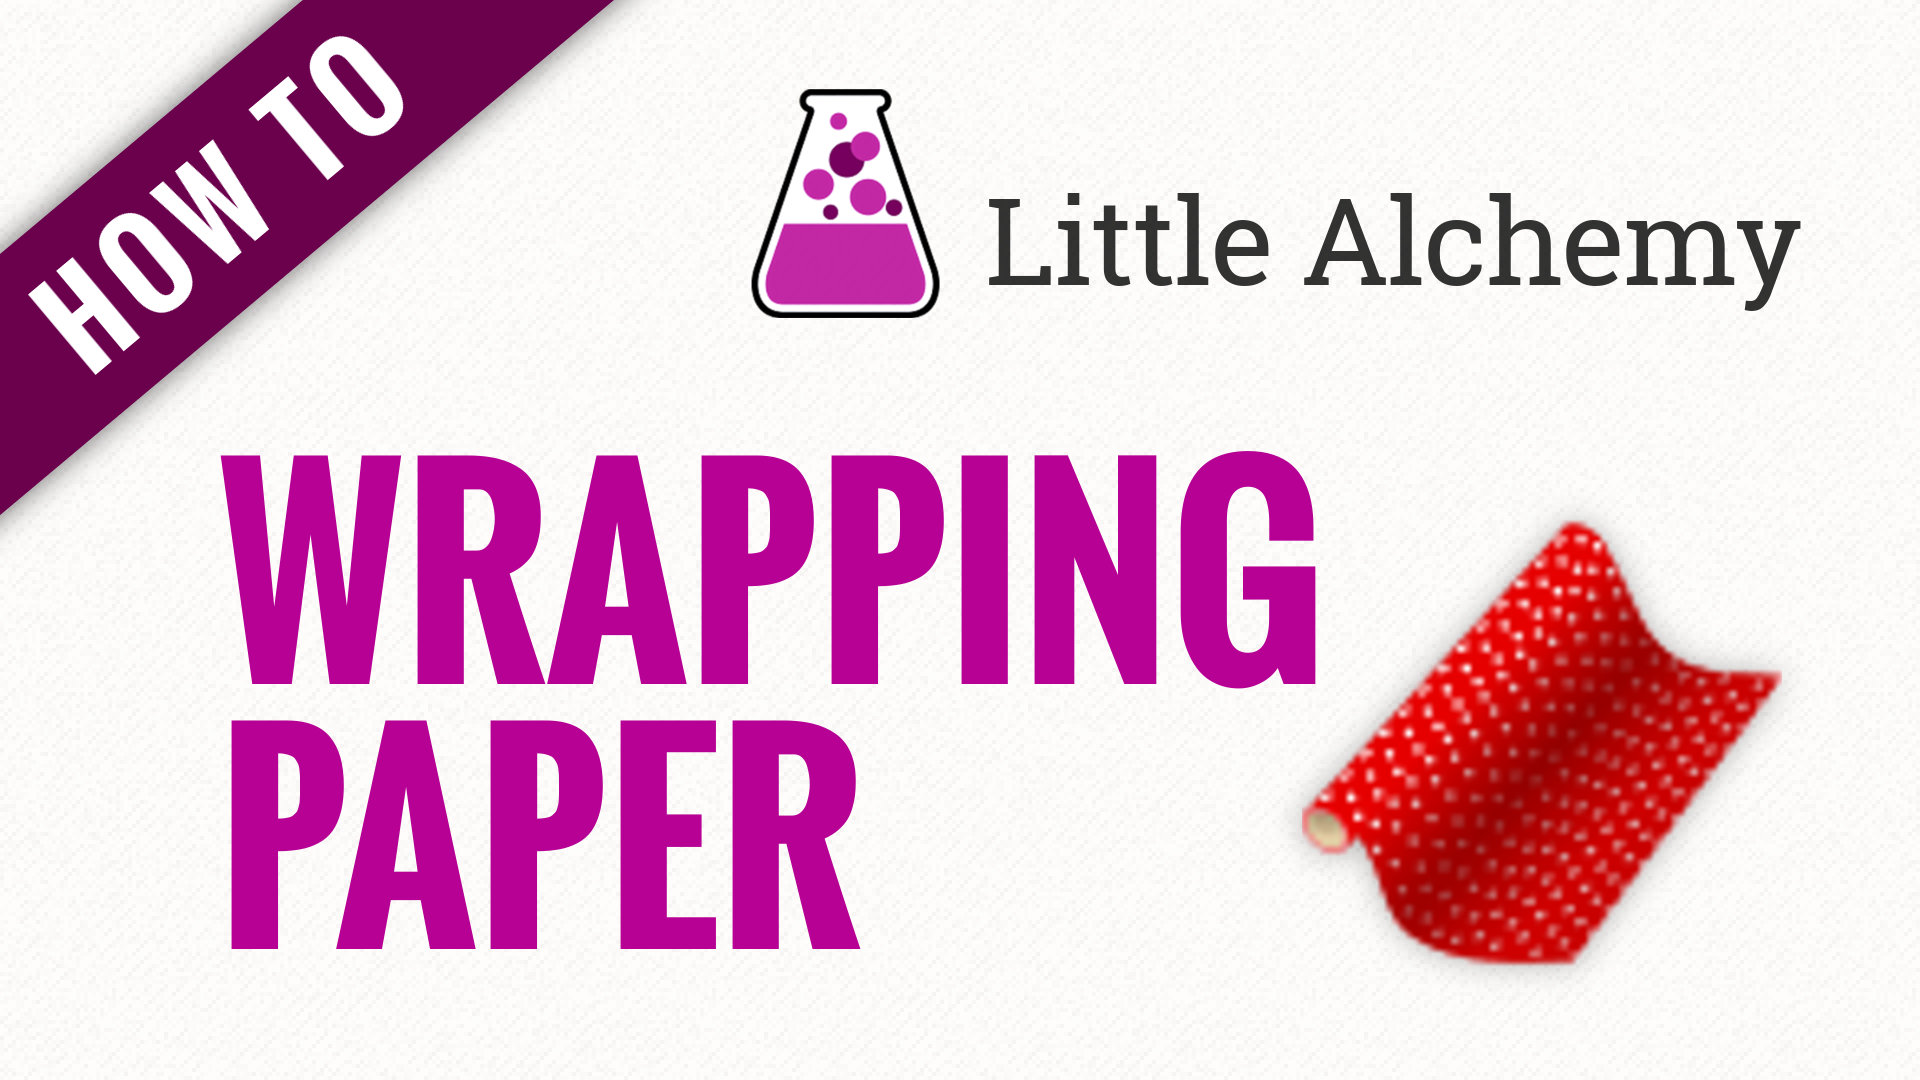 wrapping paper - Little Alchemy Cheats